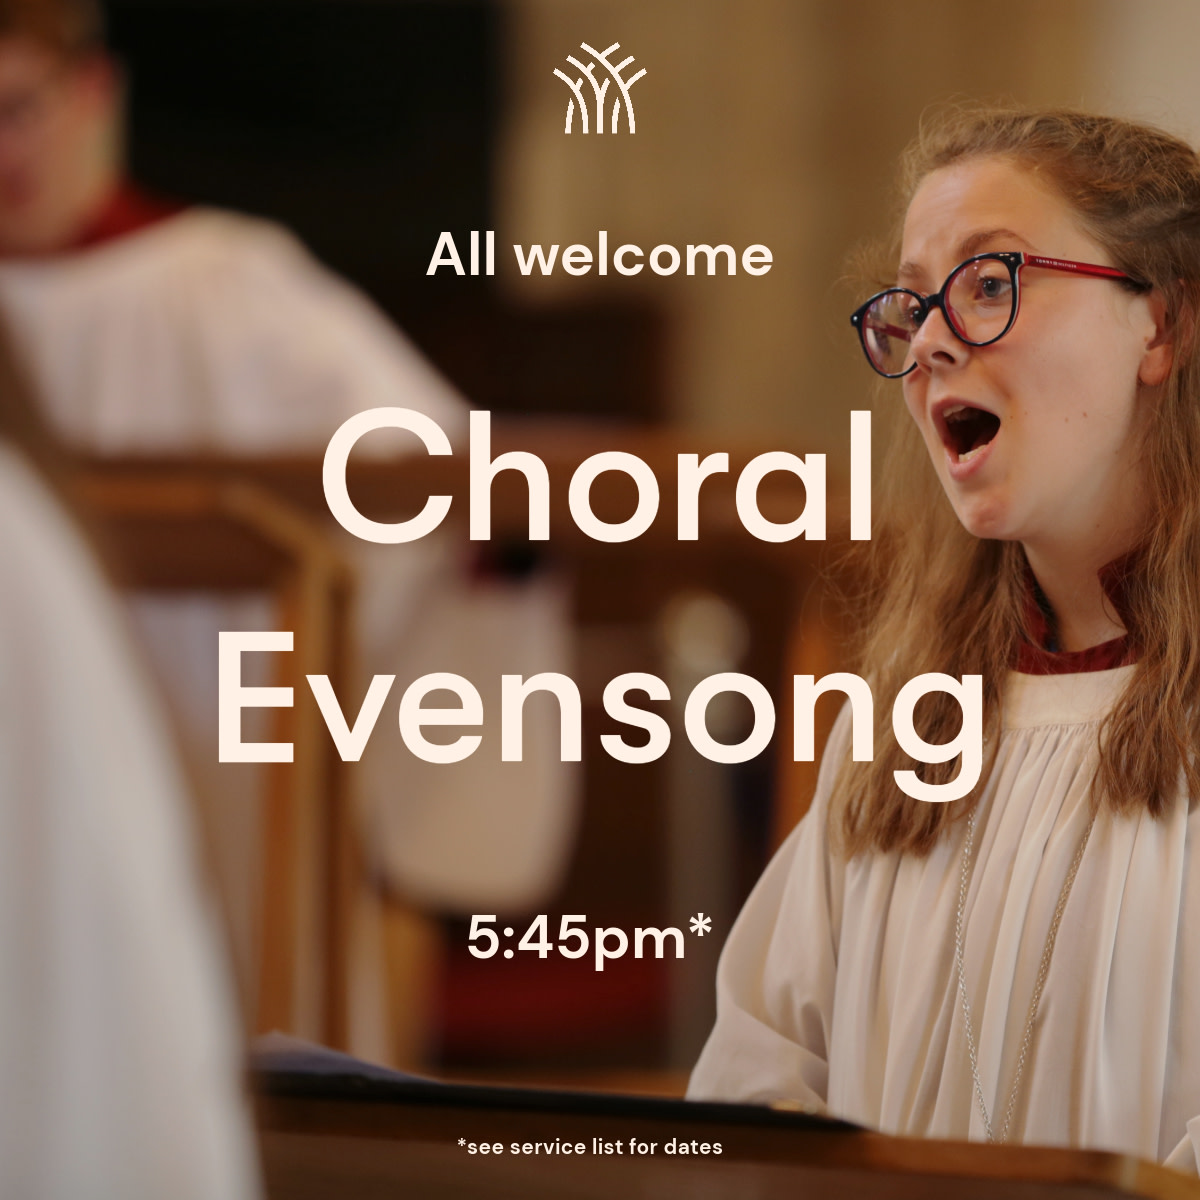 Looking for a moment of tranquility? Join us for Choral Evensong at Portsmouth Cathedral, and immerse yourself in the spiritual melodies of our Cathedral Choirs. See dates at portcath.link/evensong?utm_c… #Evensong #PortsmouthCathedral